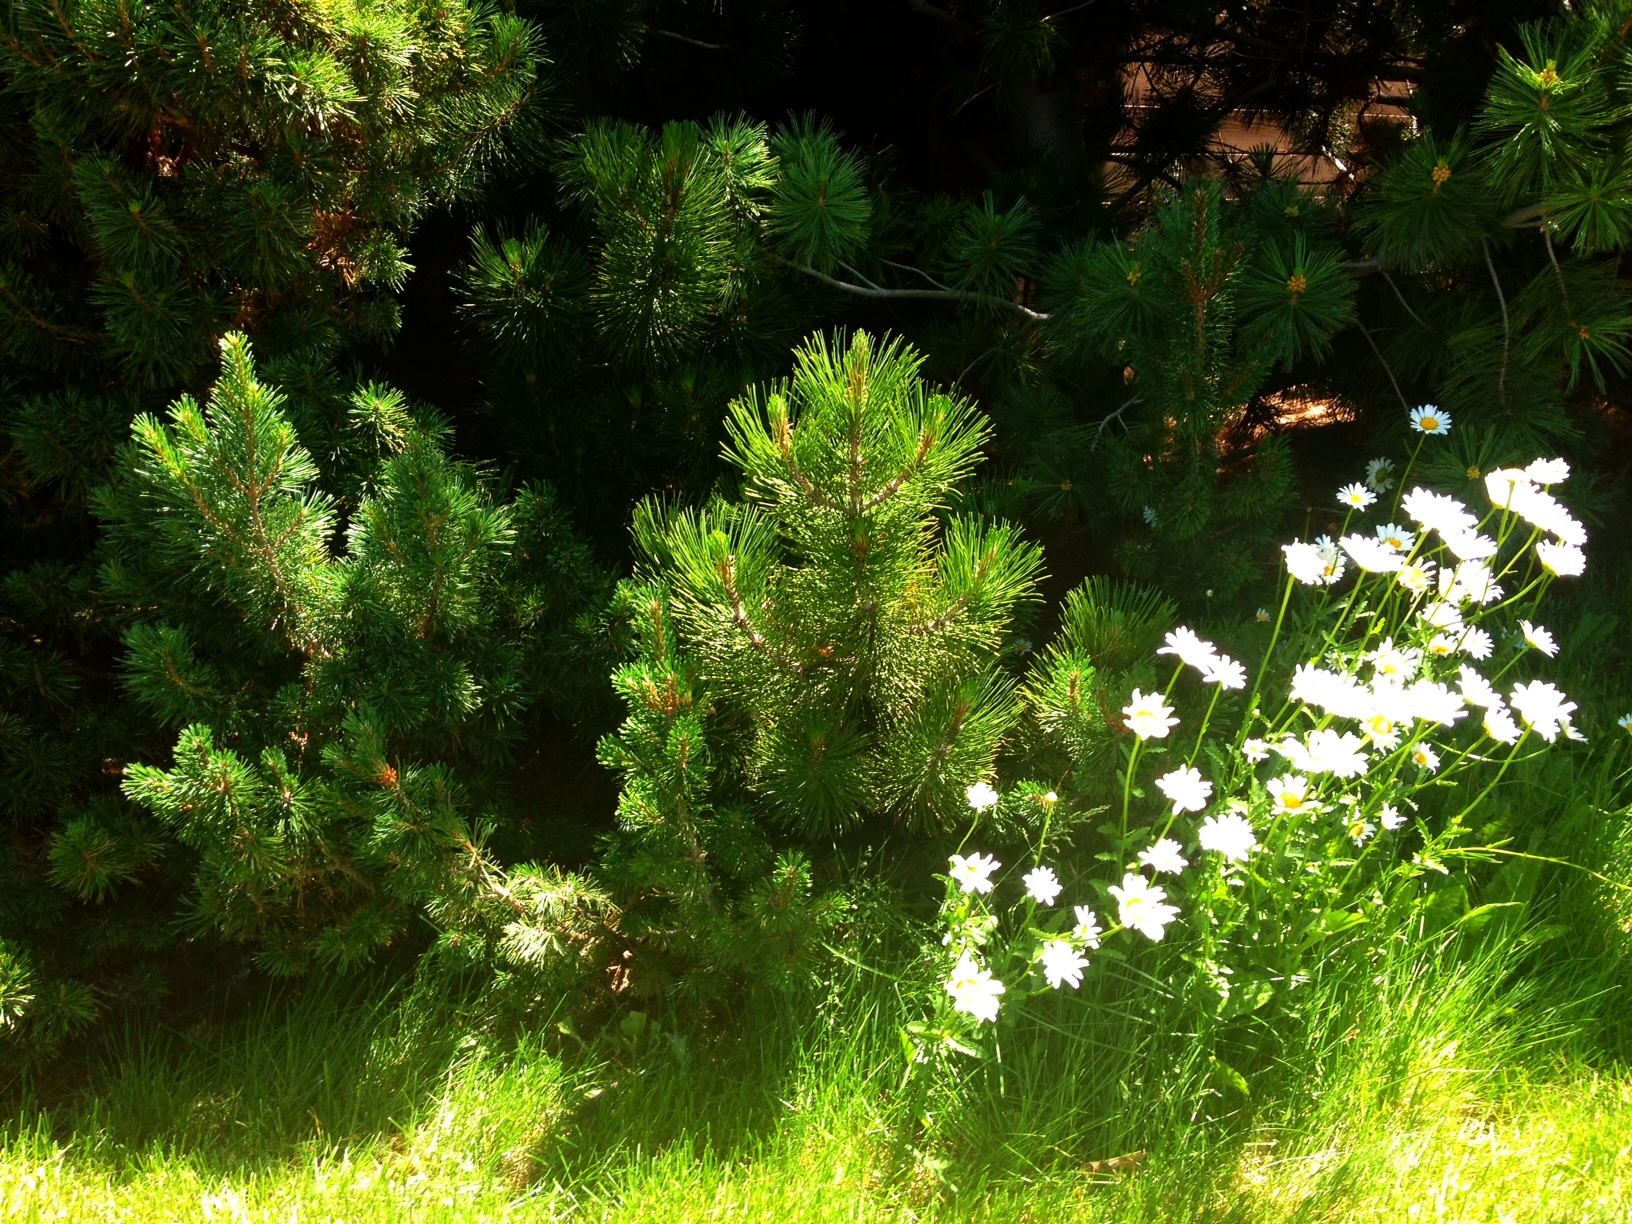 Photo of flowers and pine trees